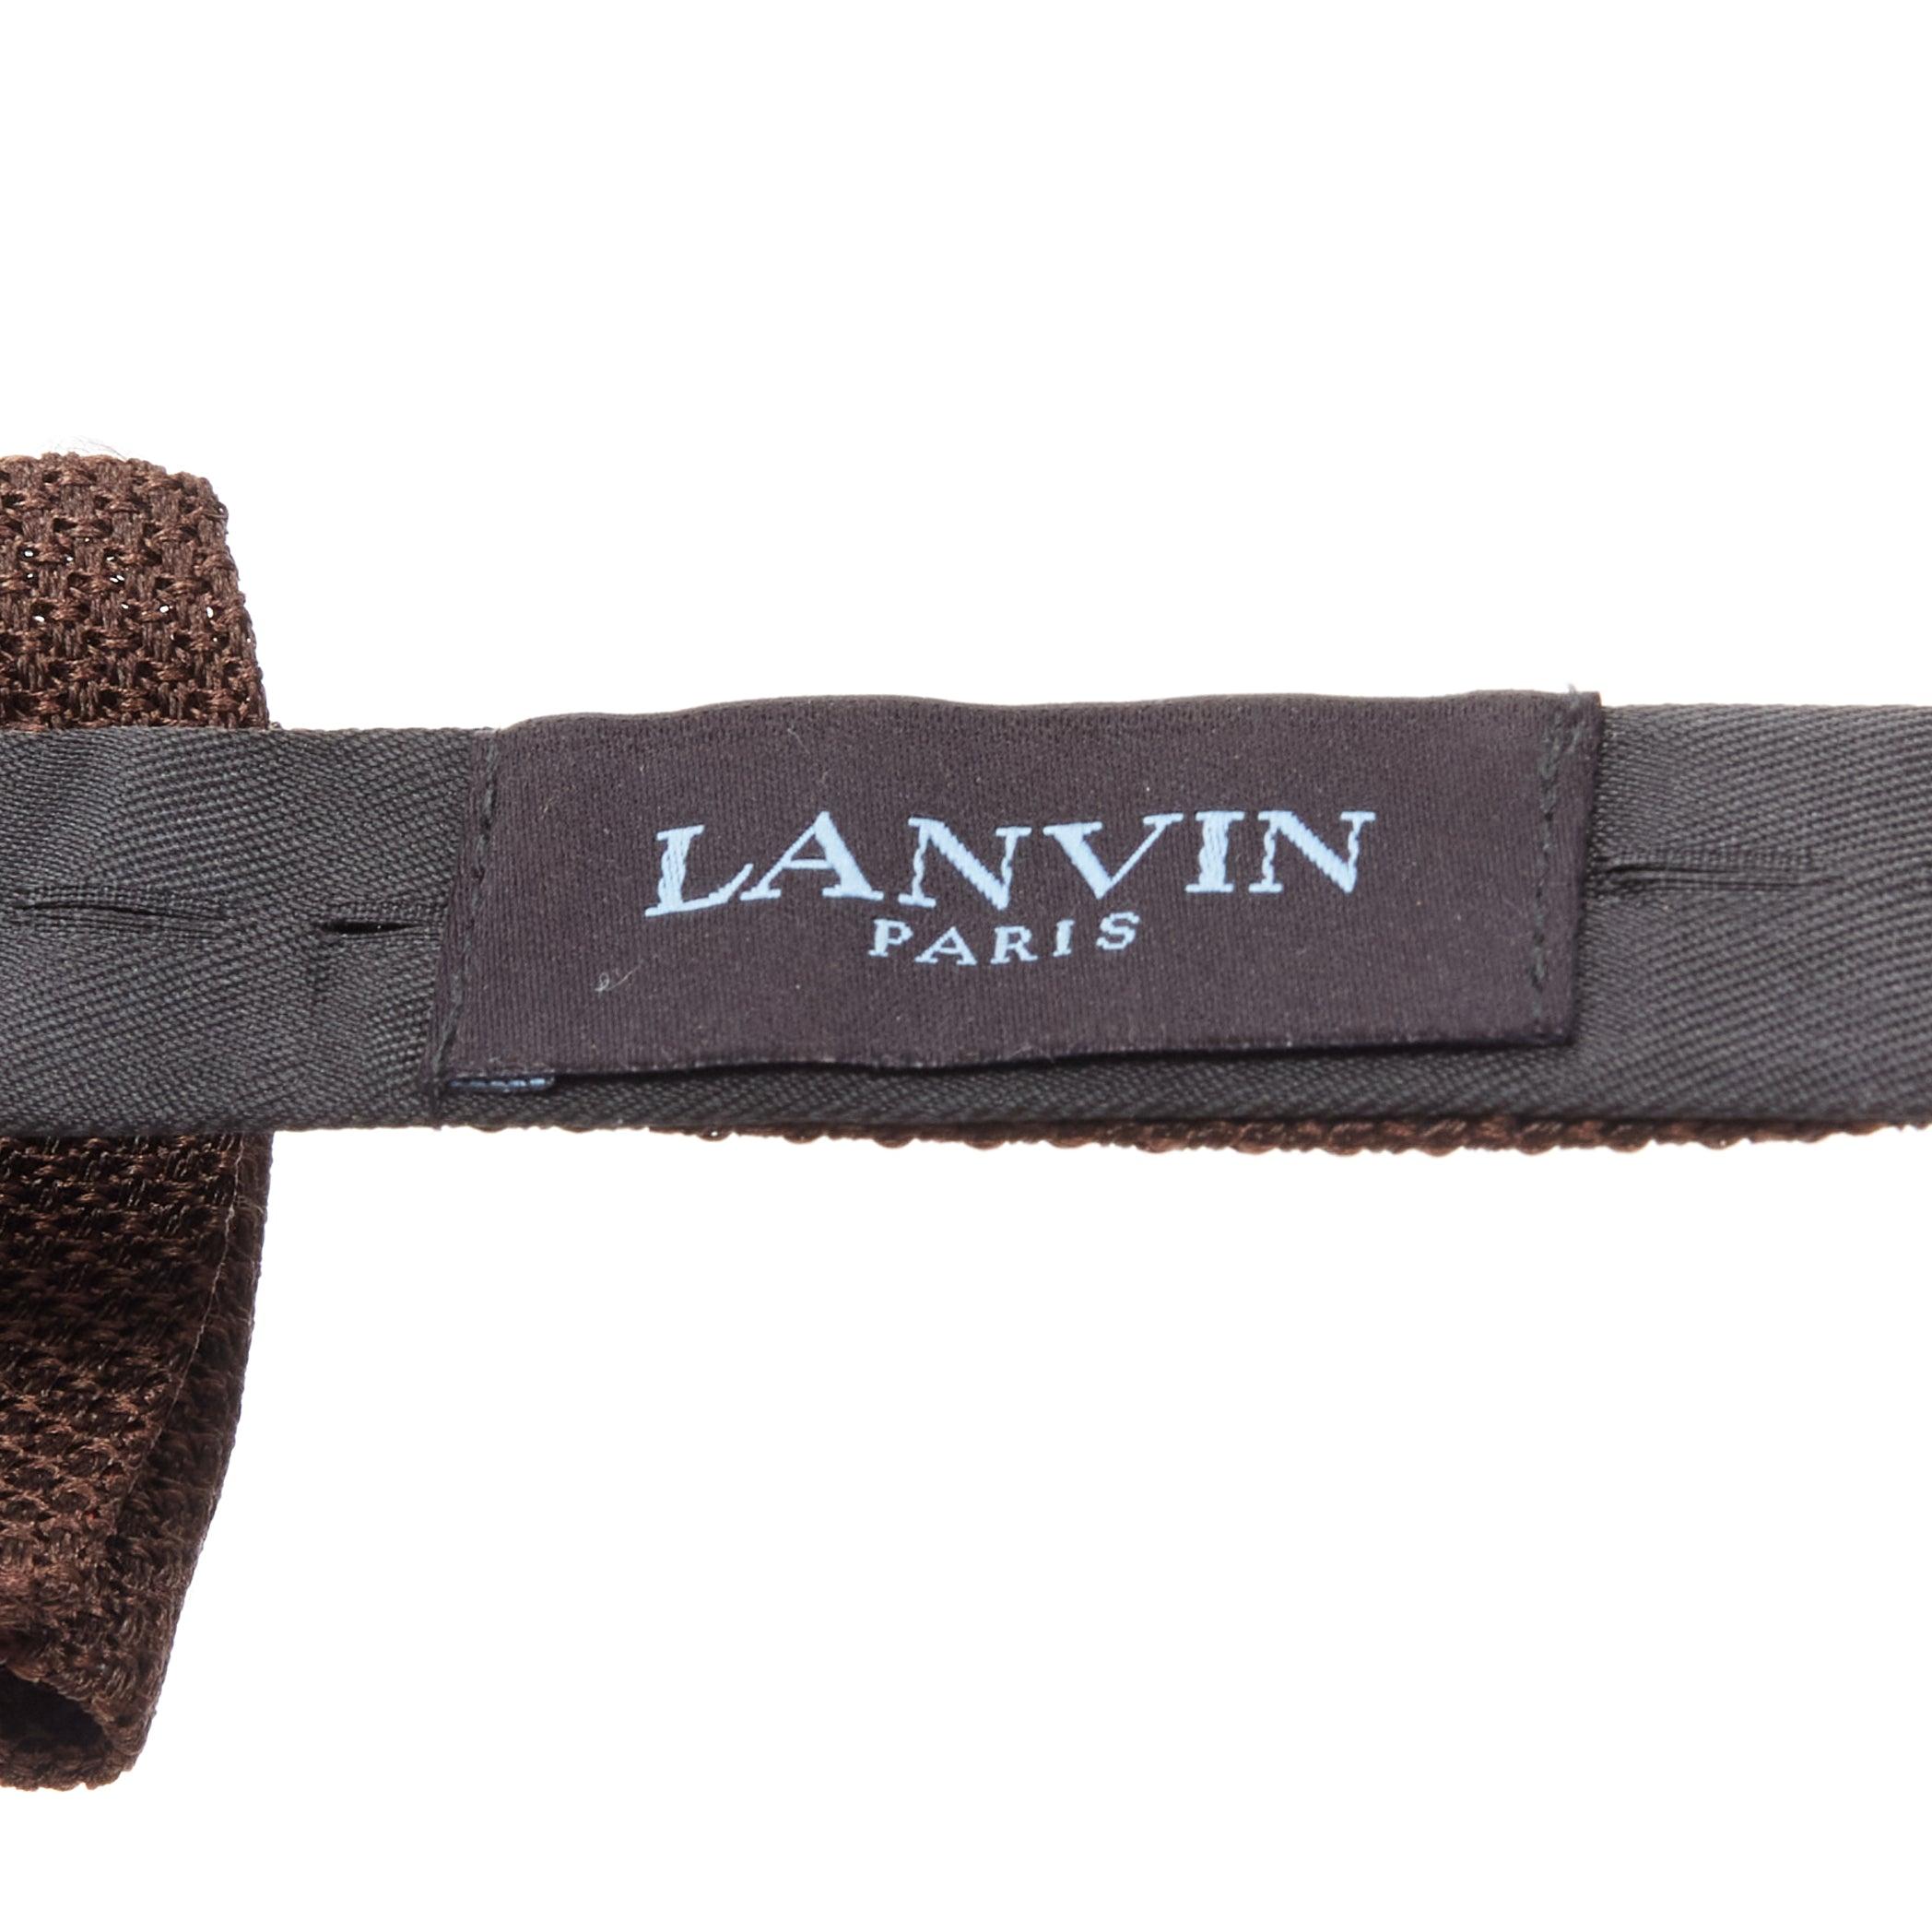 new LANVIN Alber Elbaz brown textured fabric bow tie Adjustable For Sale 3